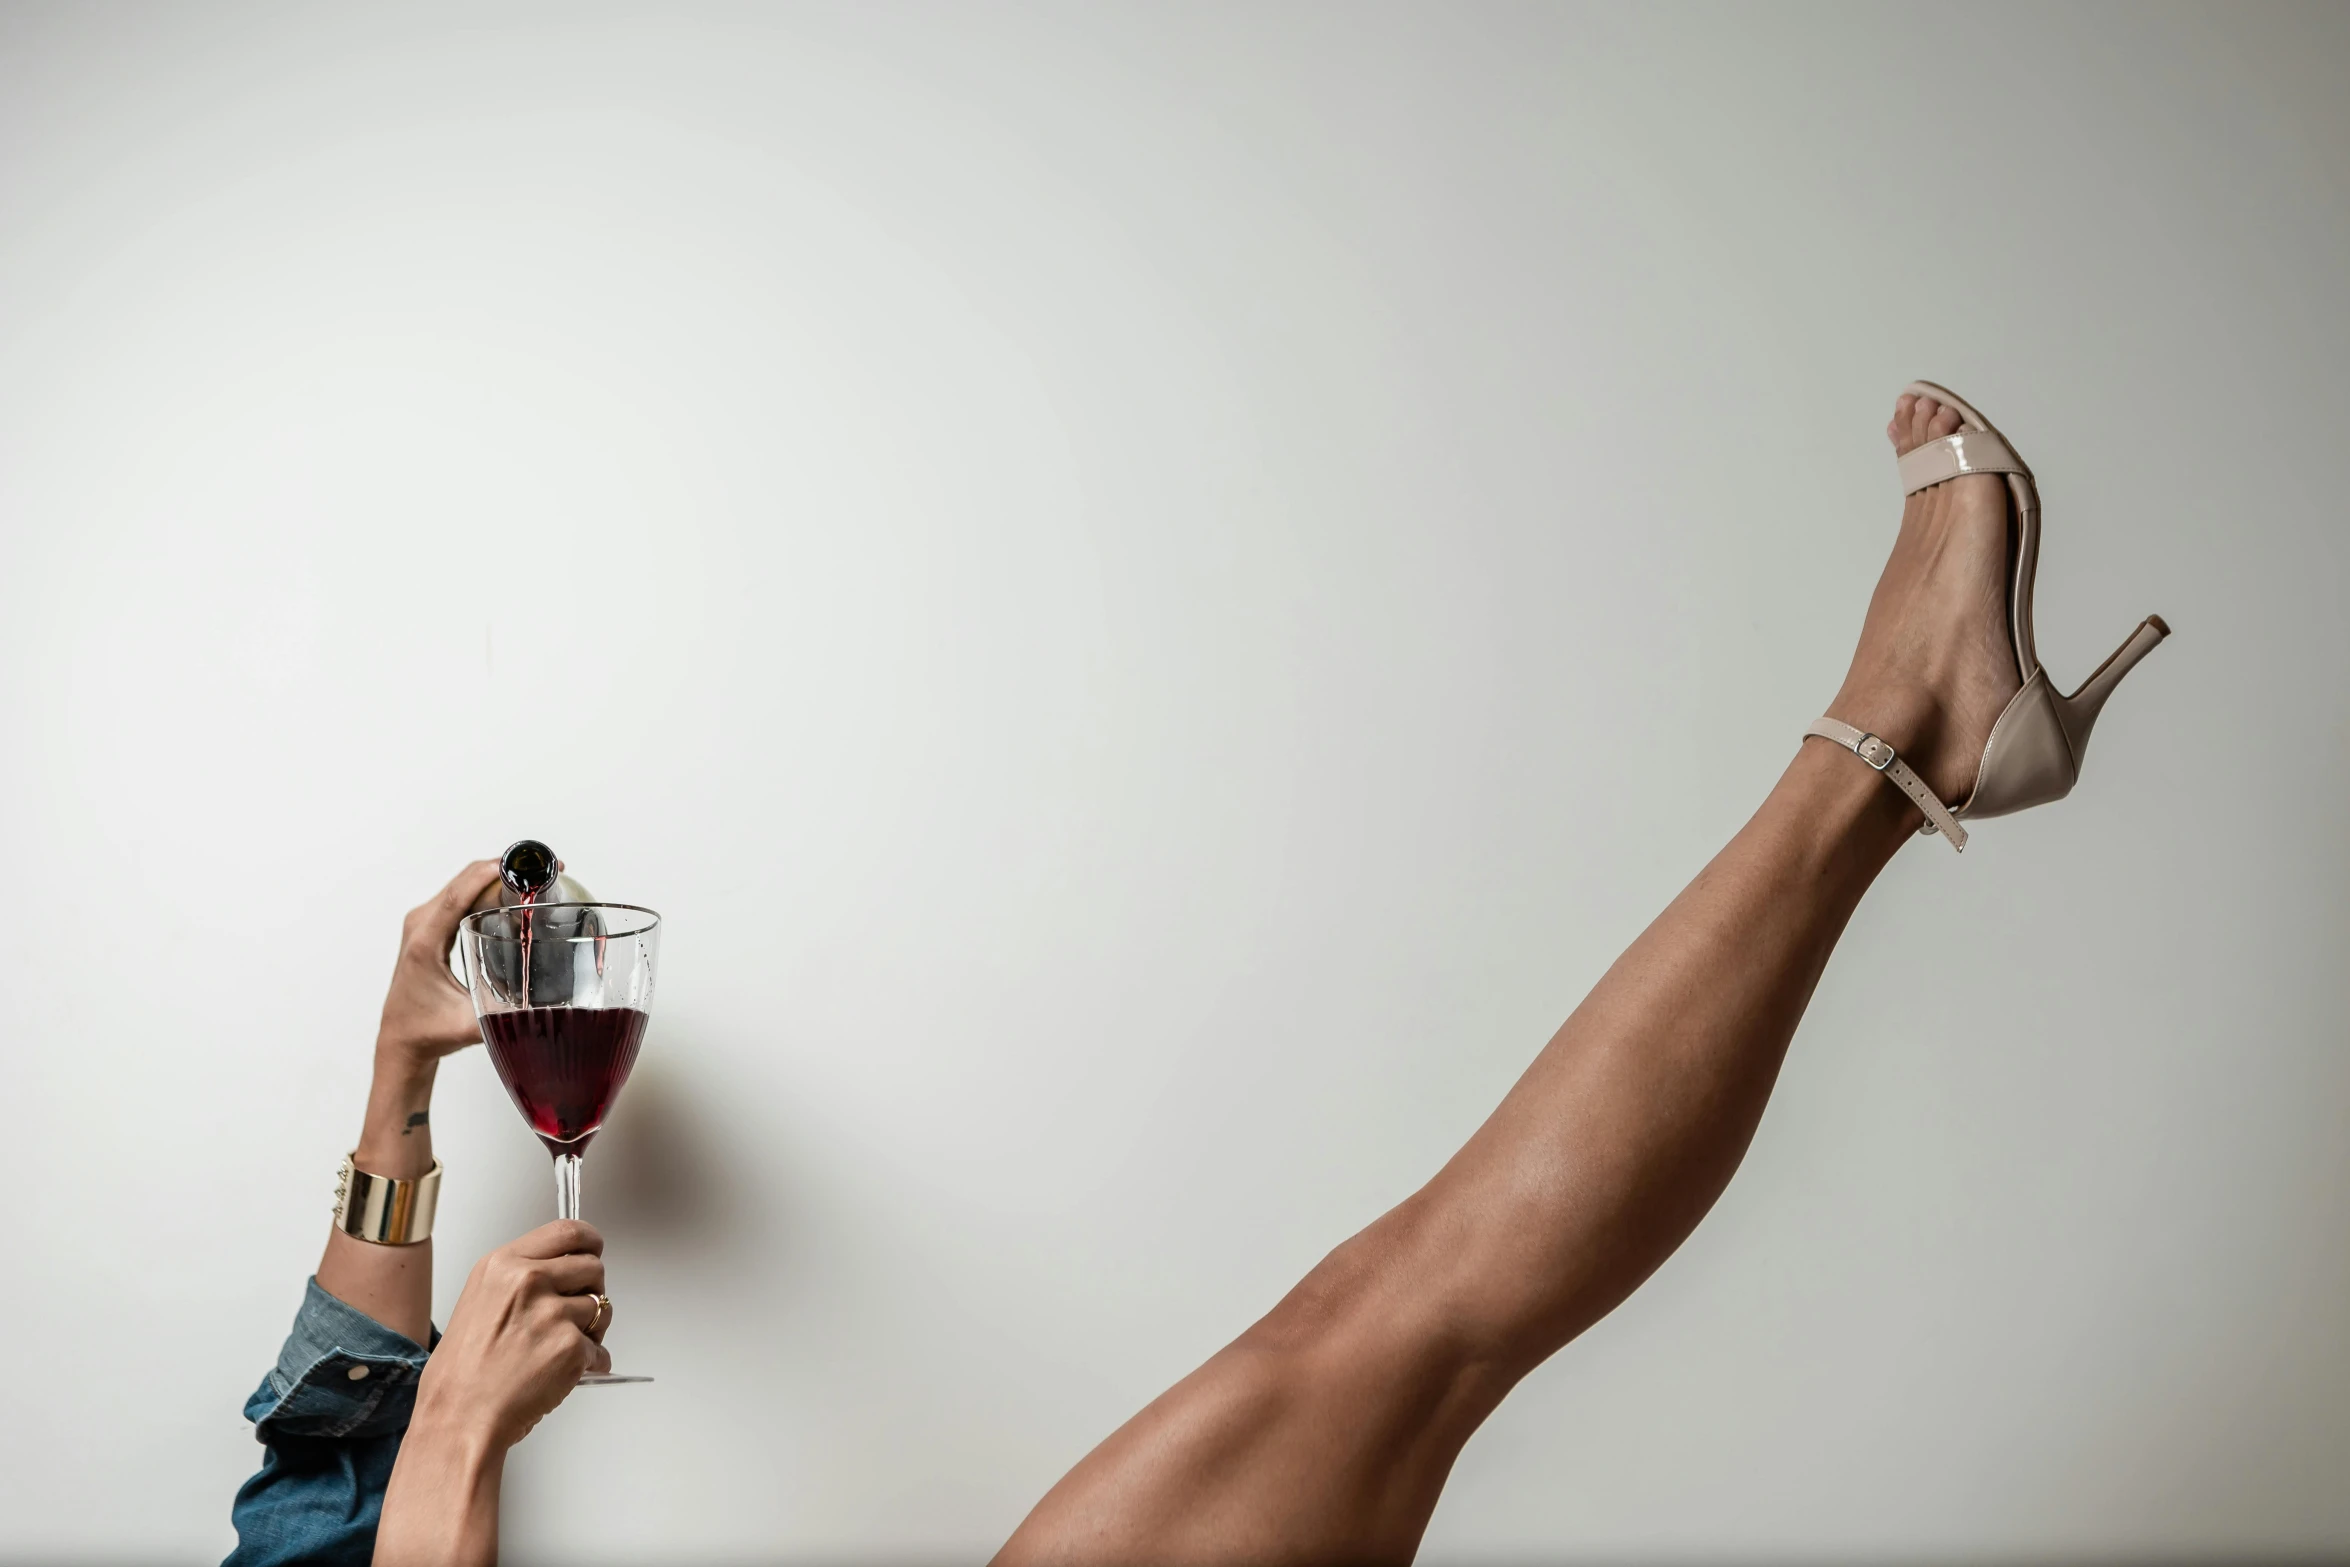 woman's feet and heels with a glass of wine